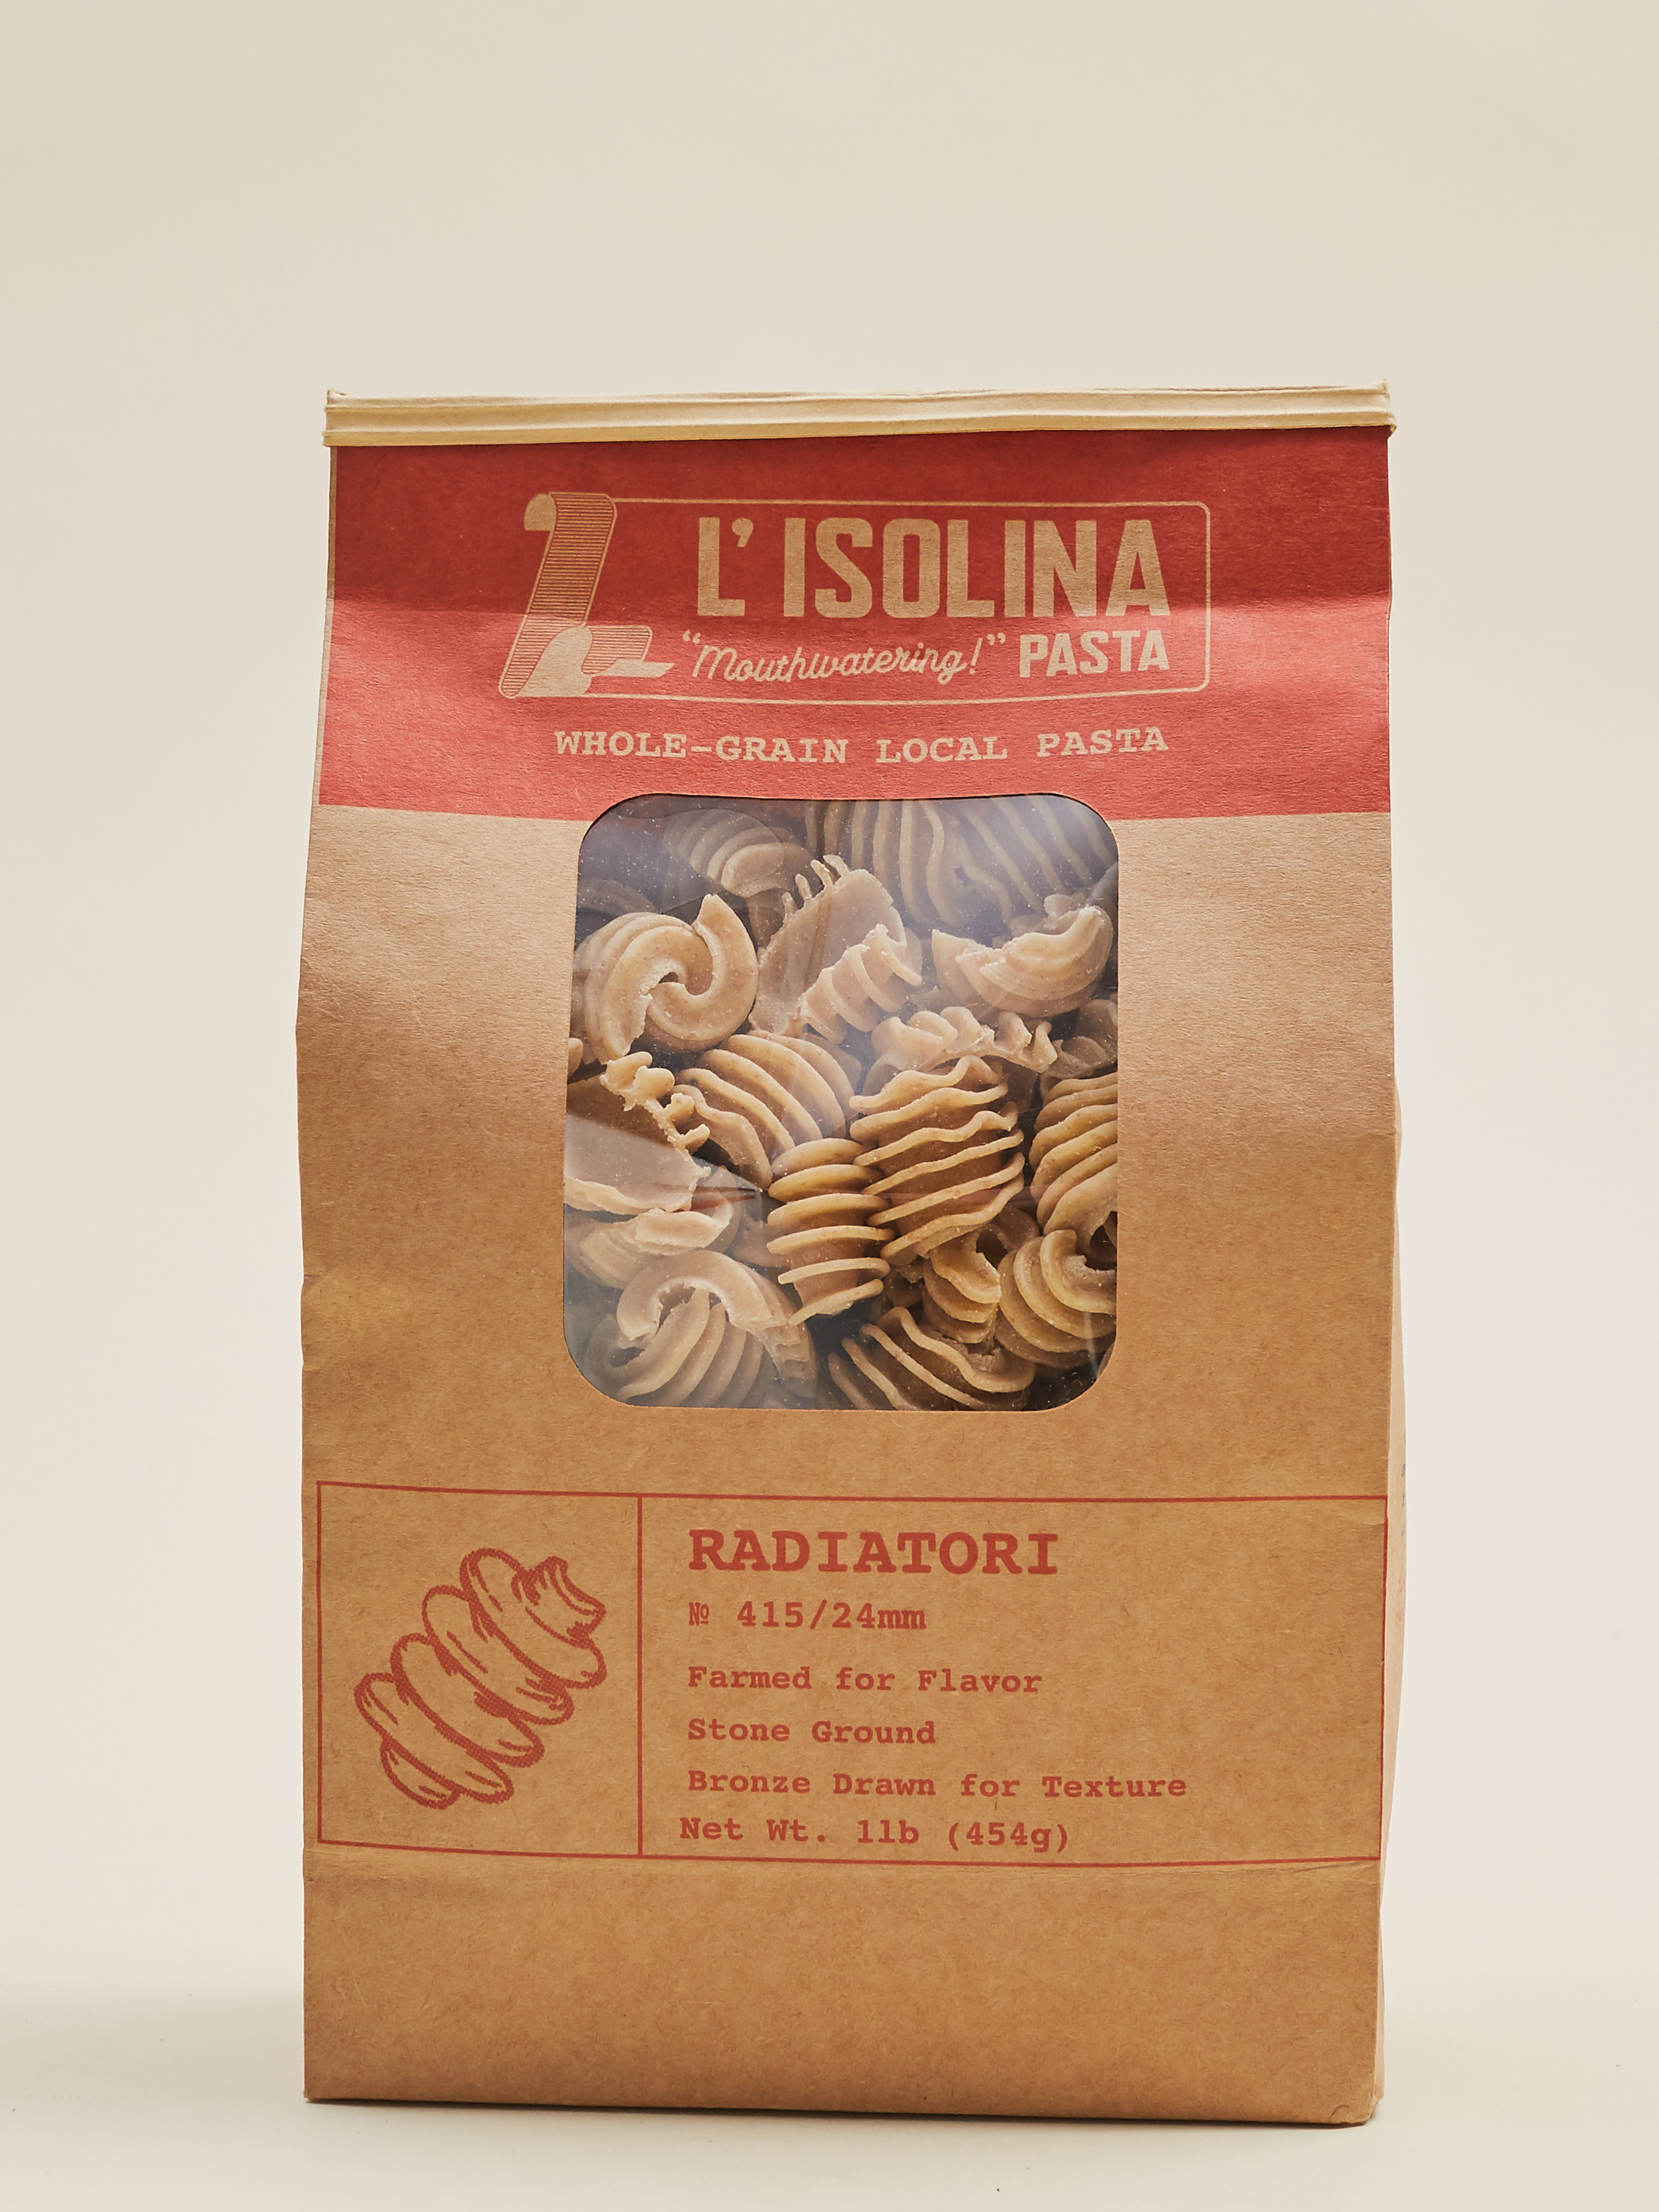 L'Isolina Variety 4-Pack